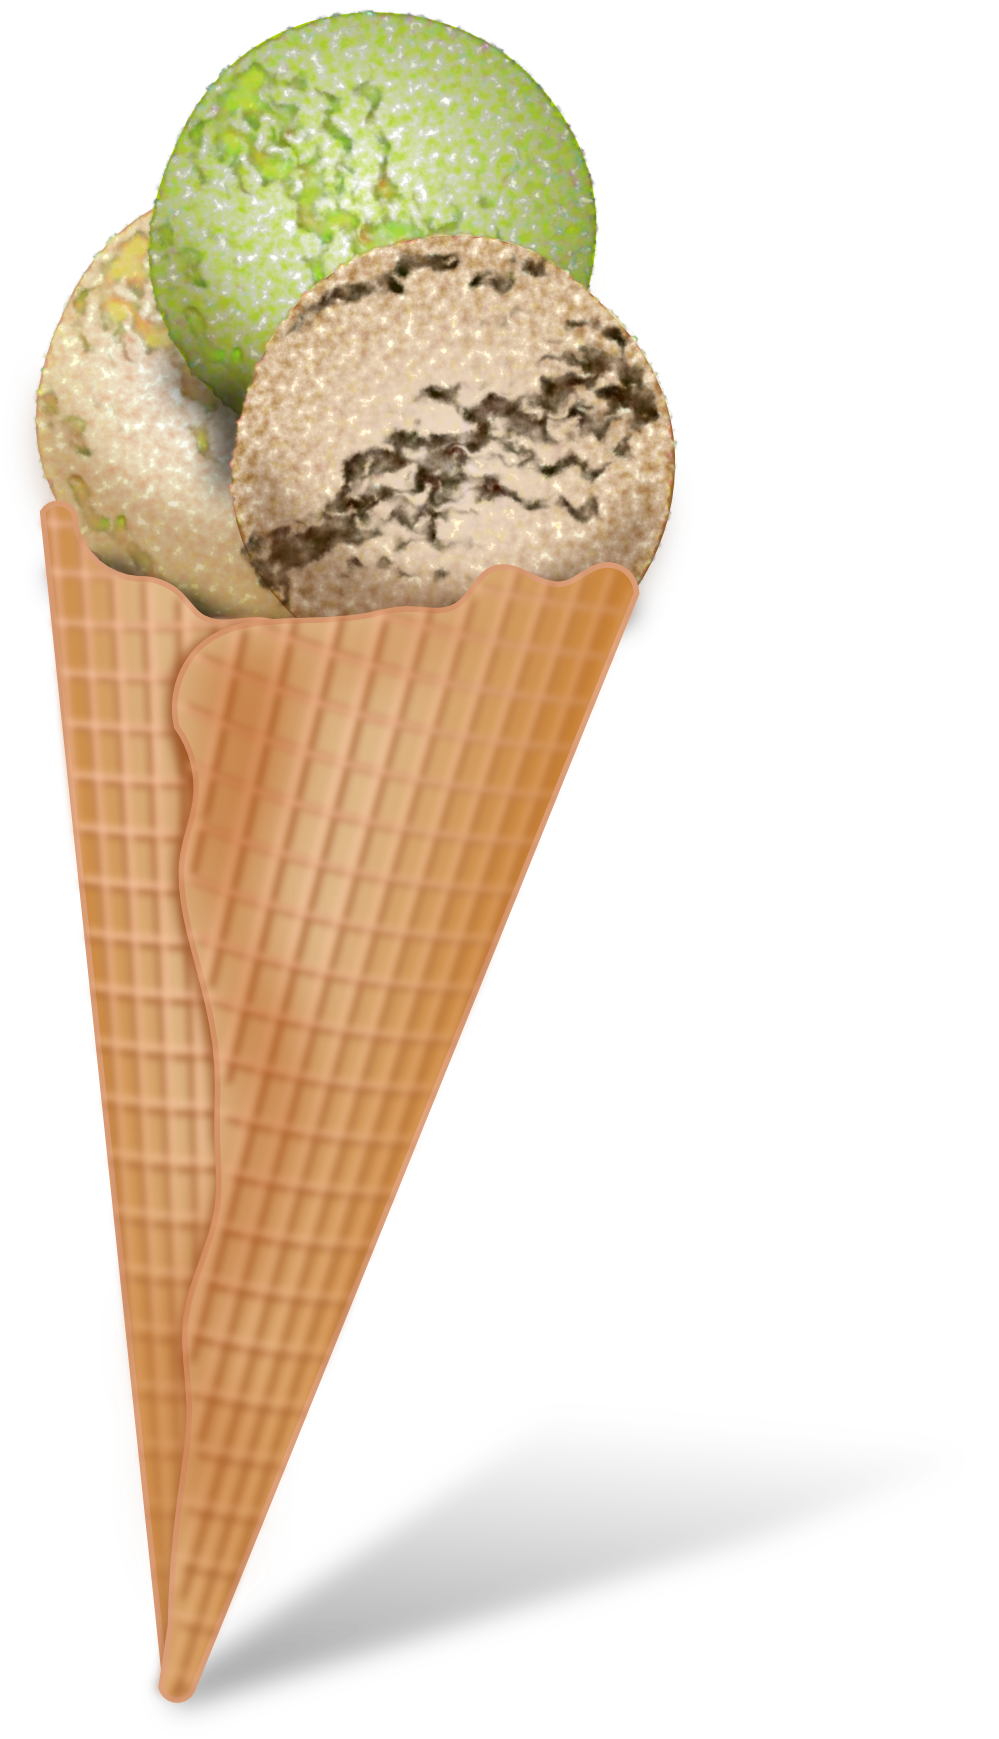 Ice Cream Cone Ice Image Image Png Clipart